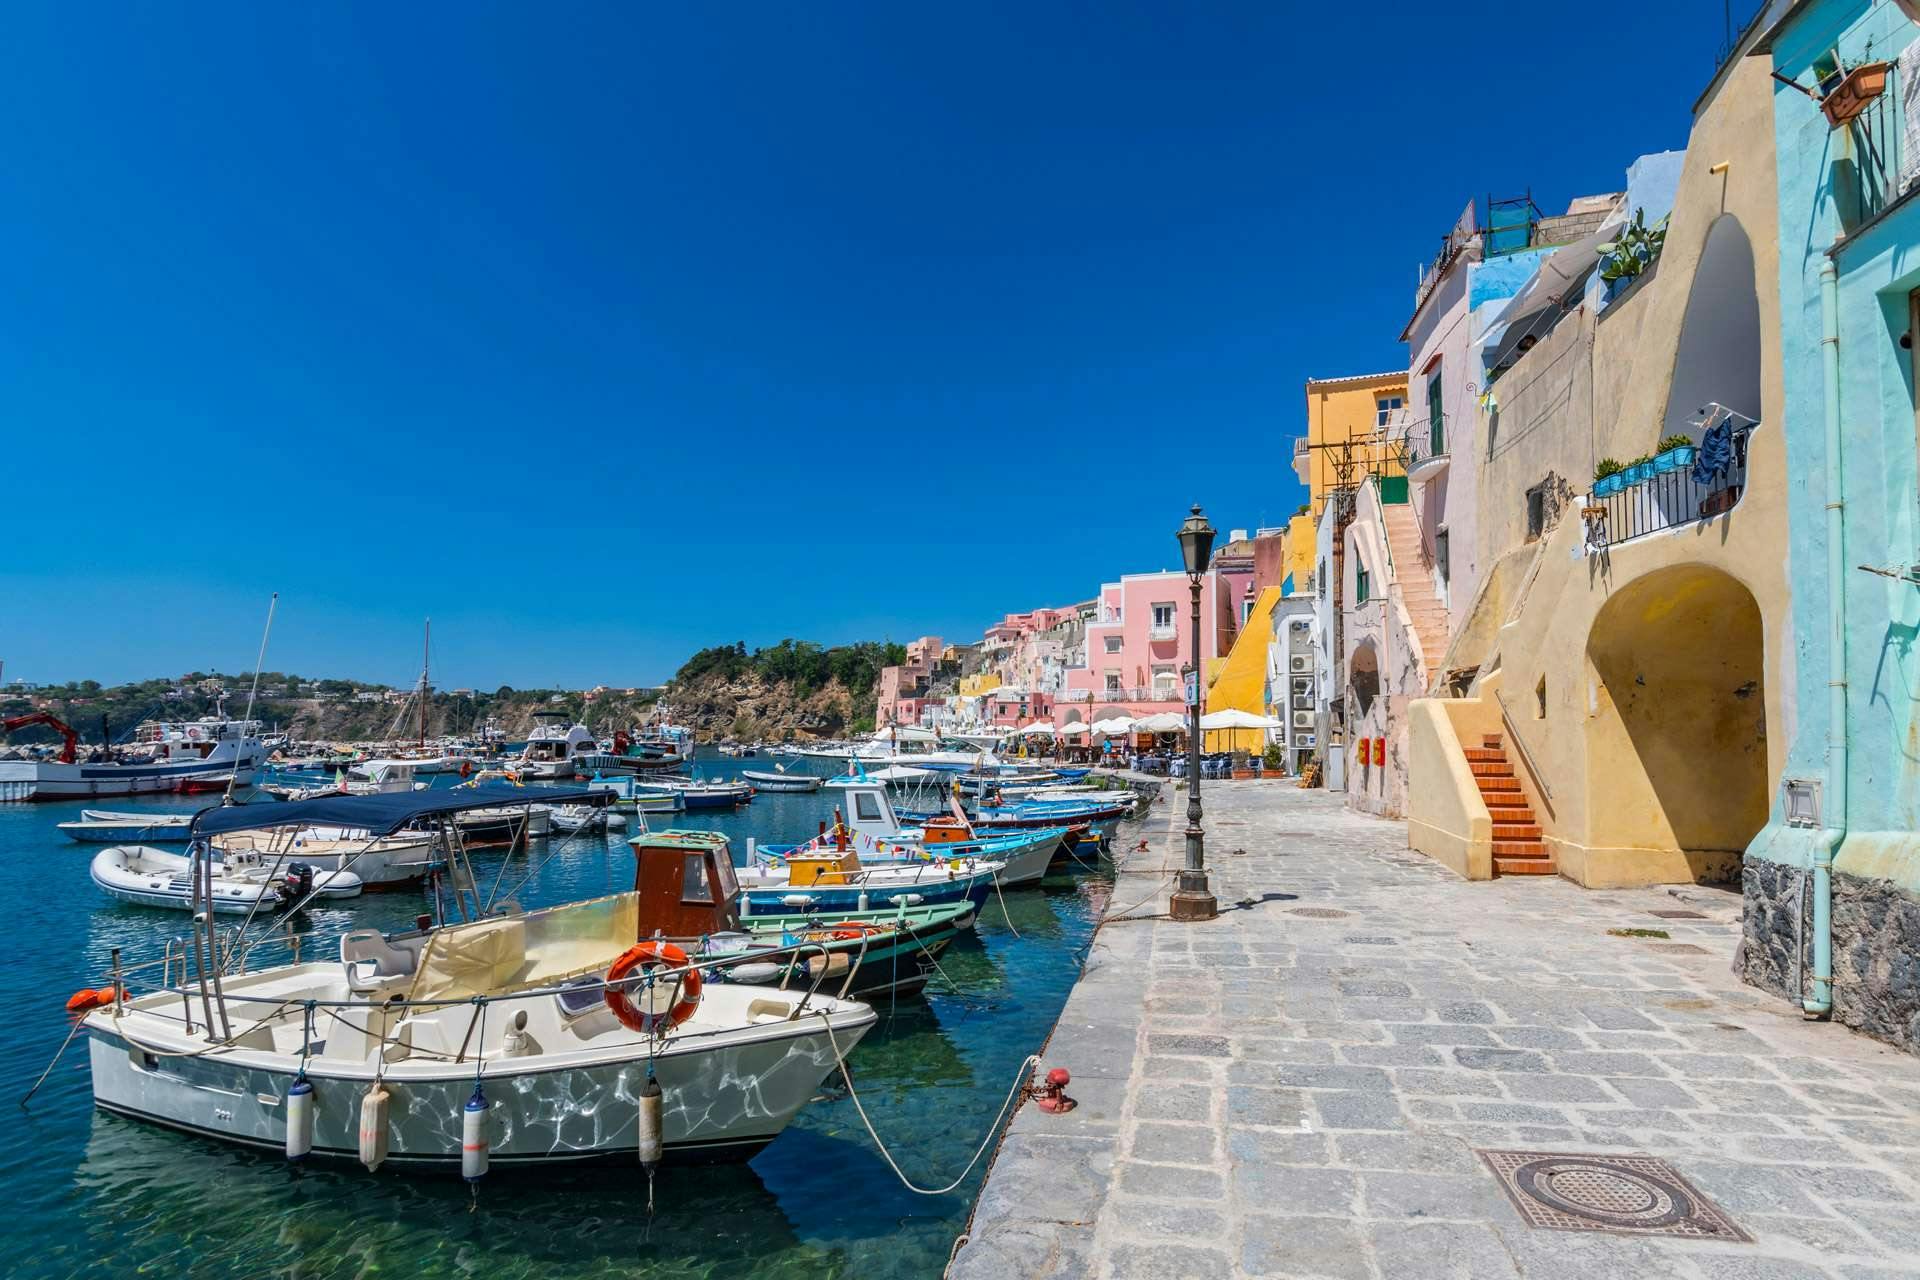 The flavour and charm of Procida island